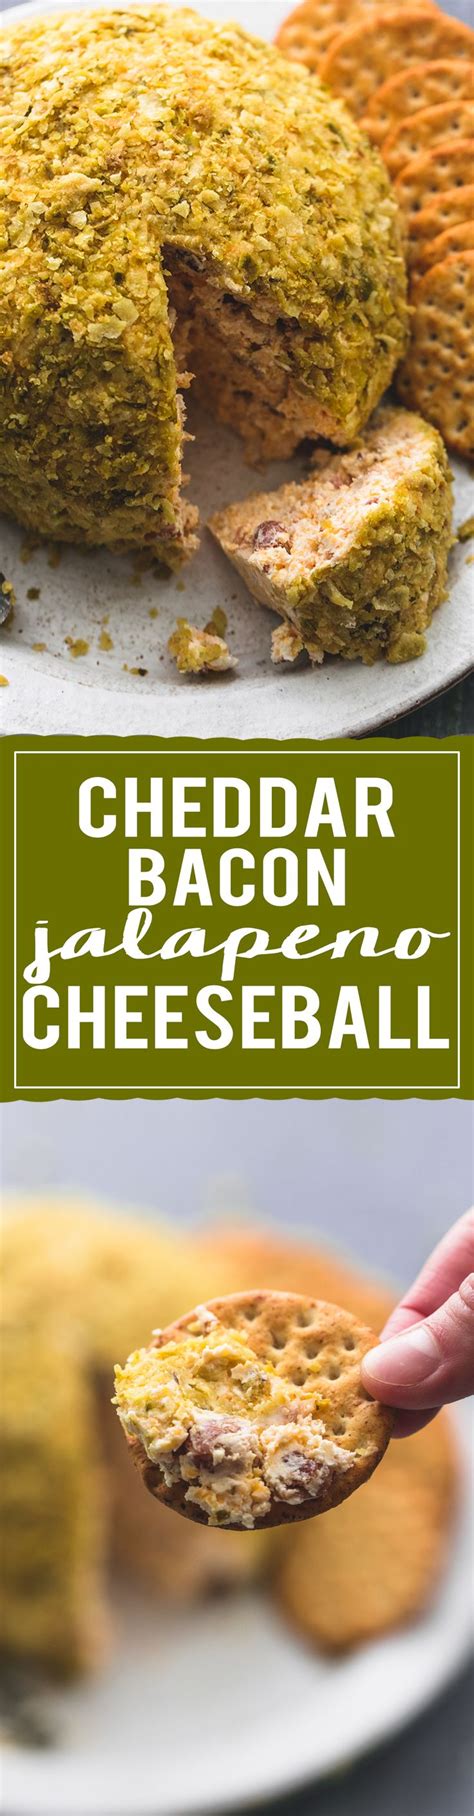 Apartment therapy is full of ideas for creating a warm, beautiful, healthy home. Cheddar Bacon Jalapeno Cheeseball is a tasty make-ahead ...